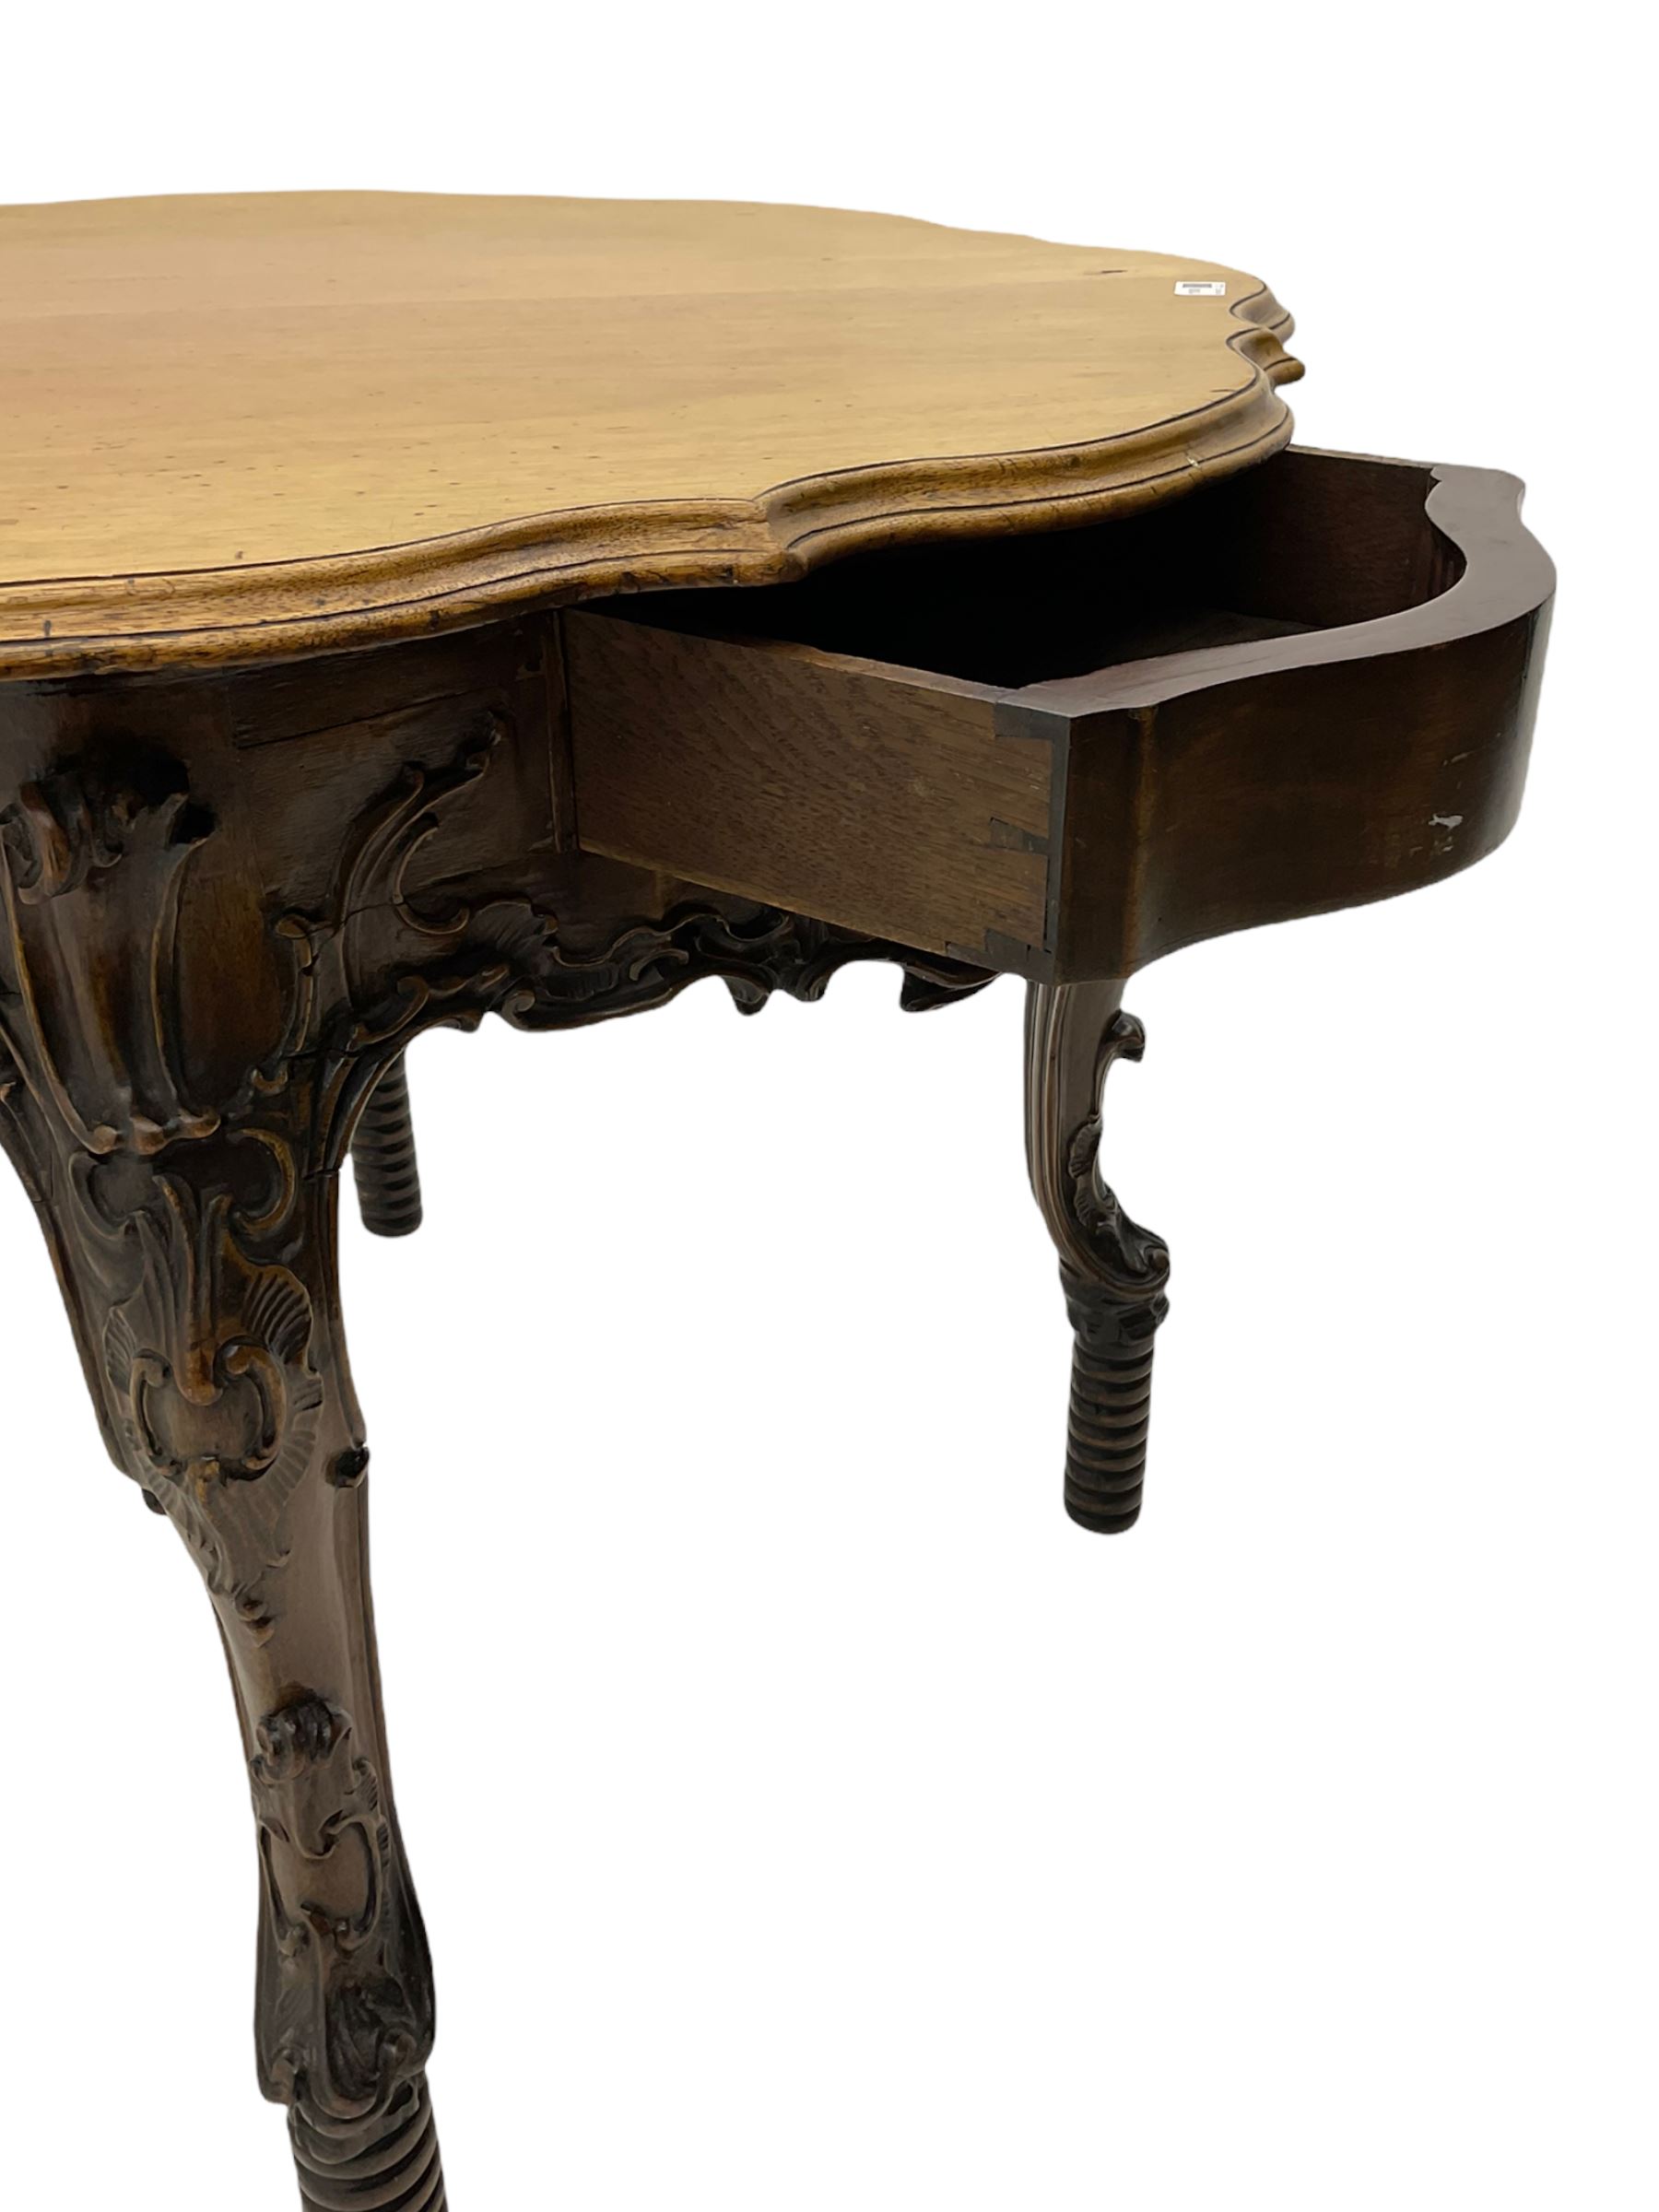 19th century walnut centre table - Image 5 of 9